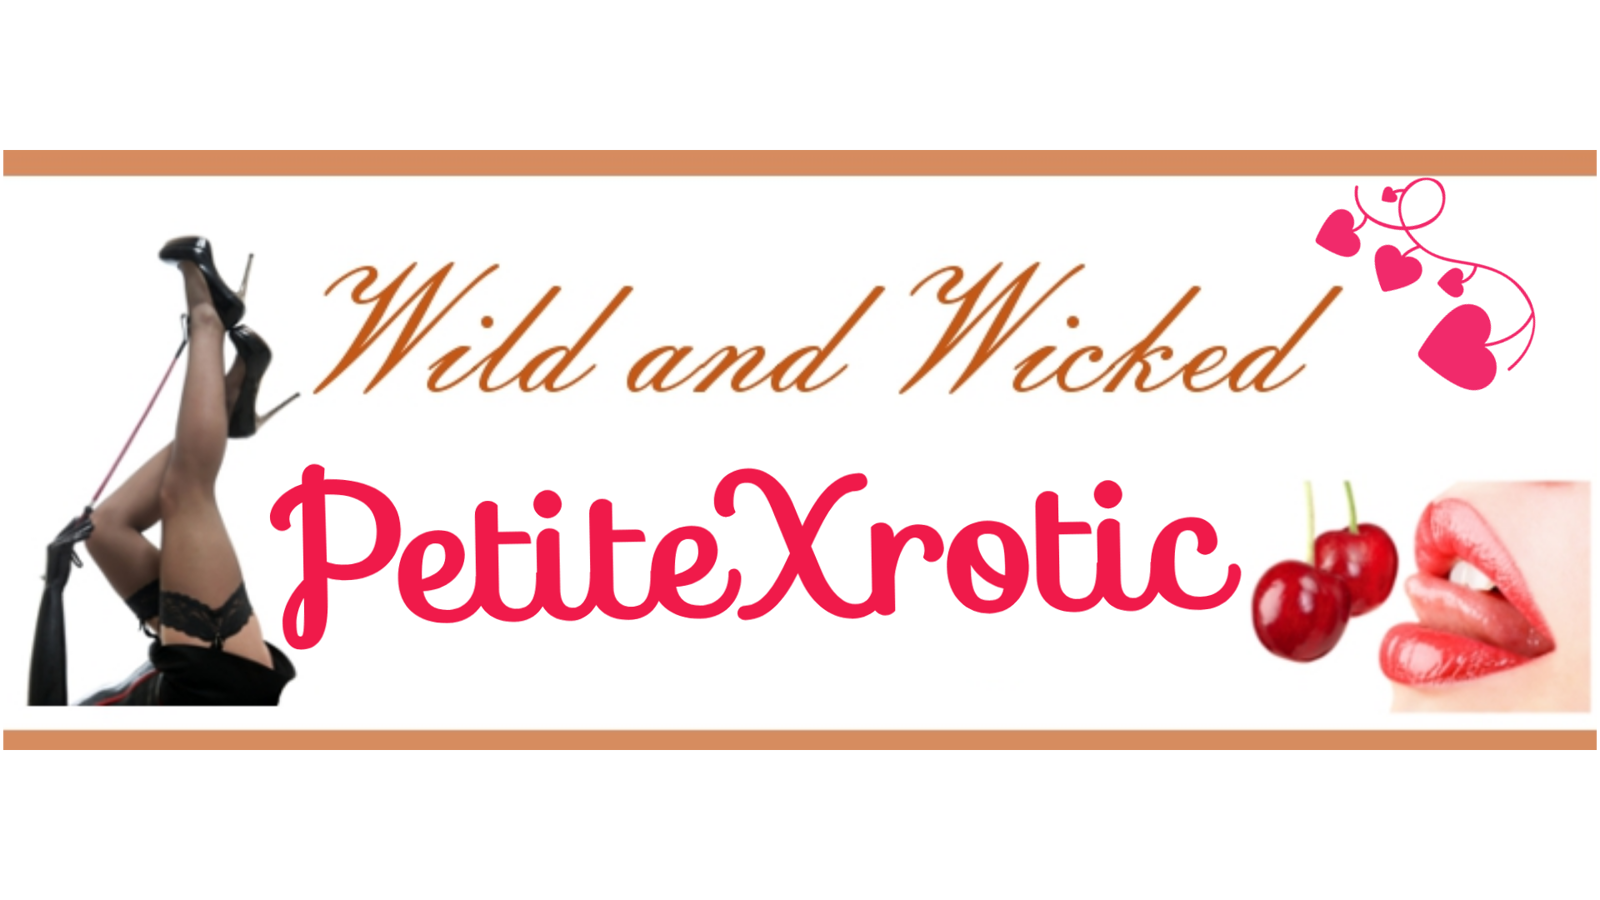 Cover photo of PetiteXrotic